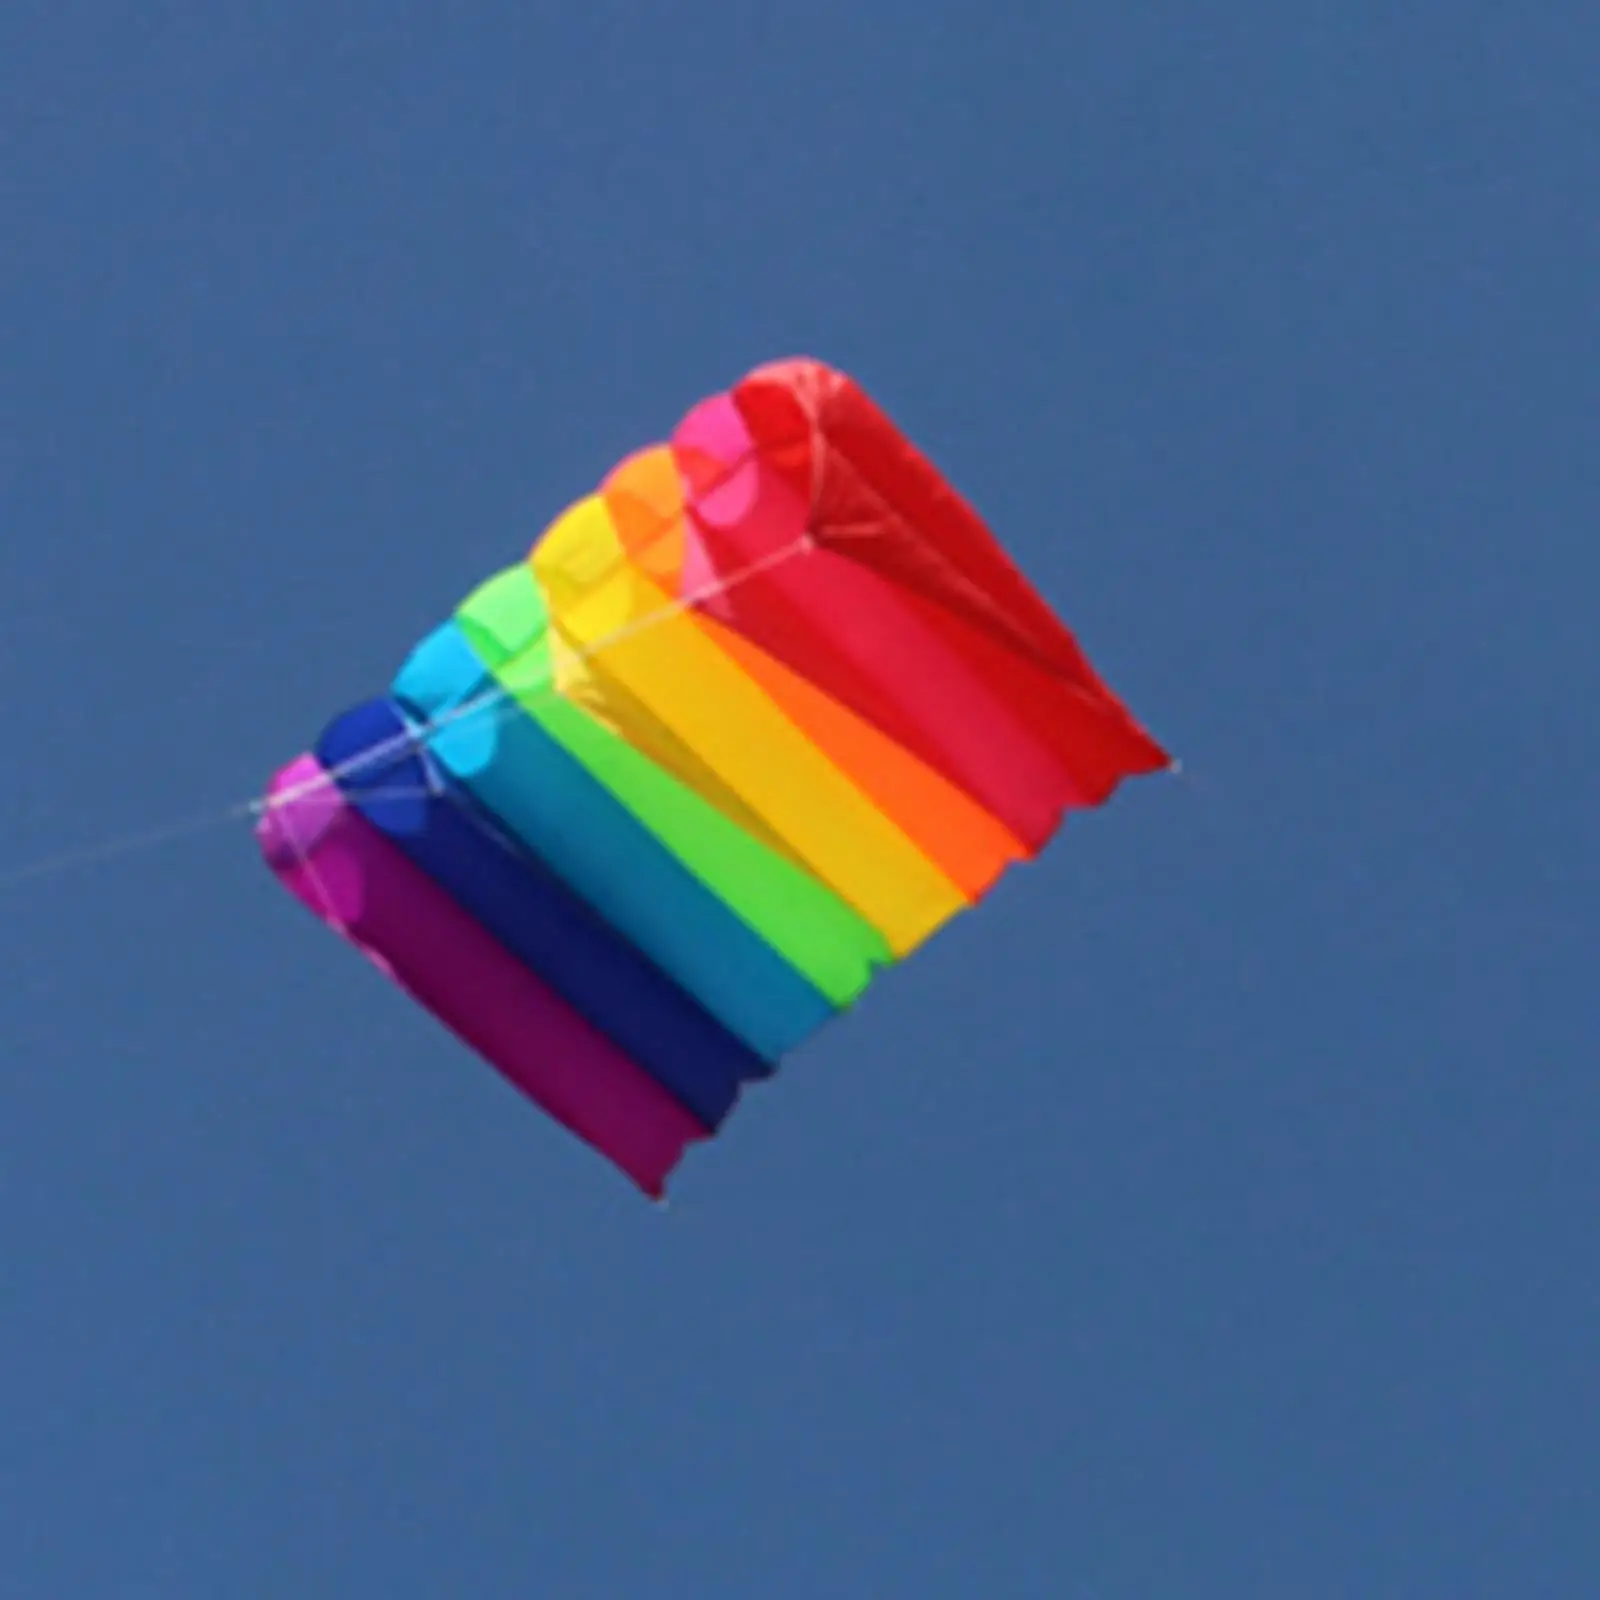 Single Line Kites and 9.84ft Flying Line for Kids and Adults Beginners